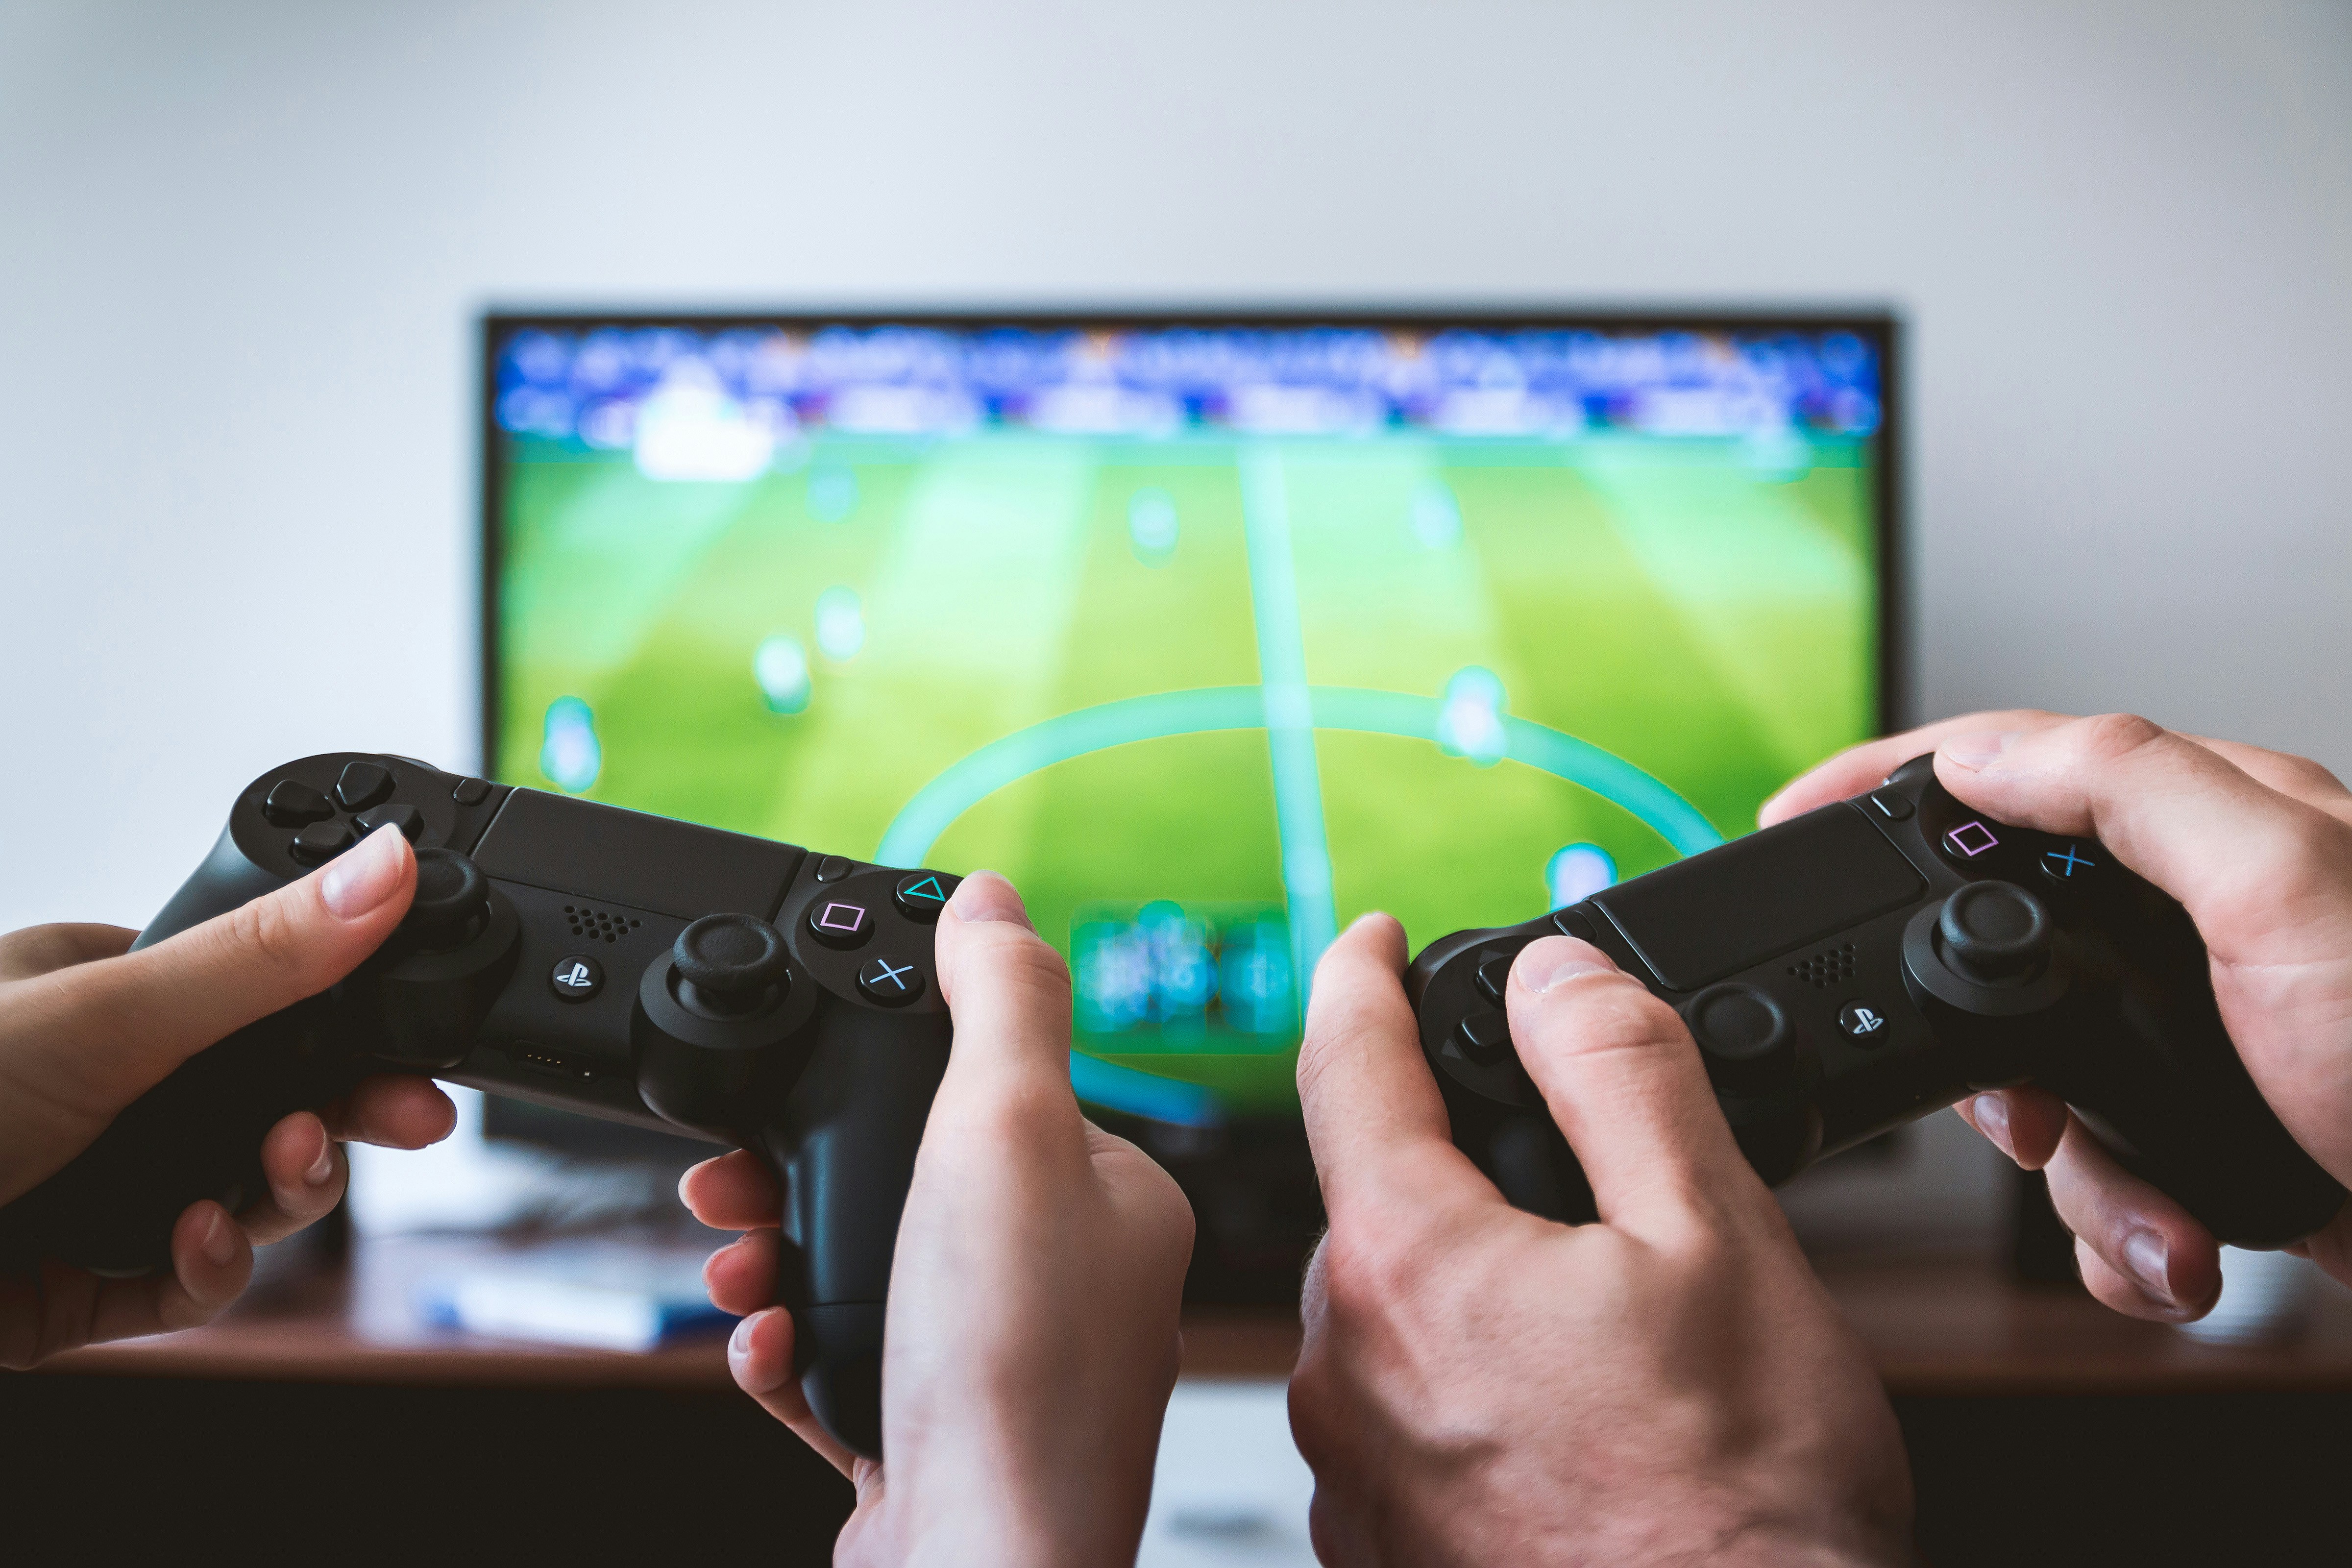 Tapping into New Opportunities: How Digital Value Can Transform Gaming